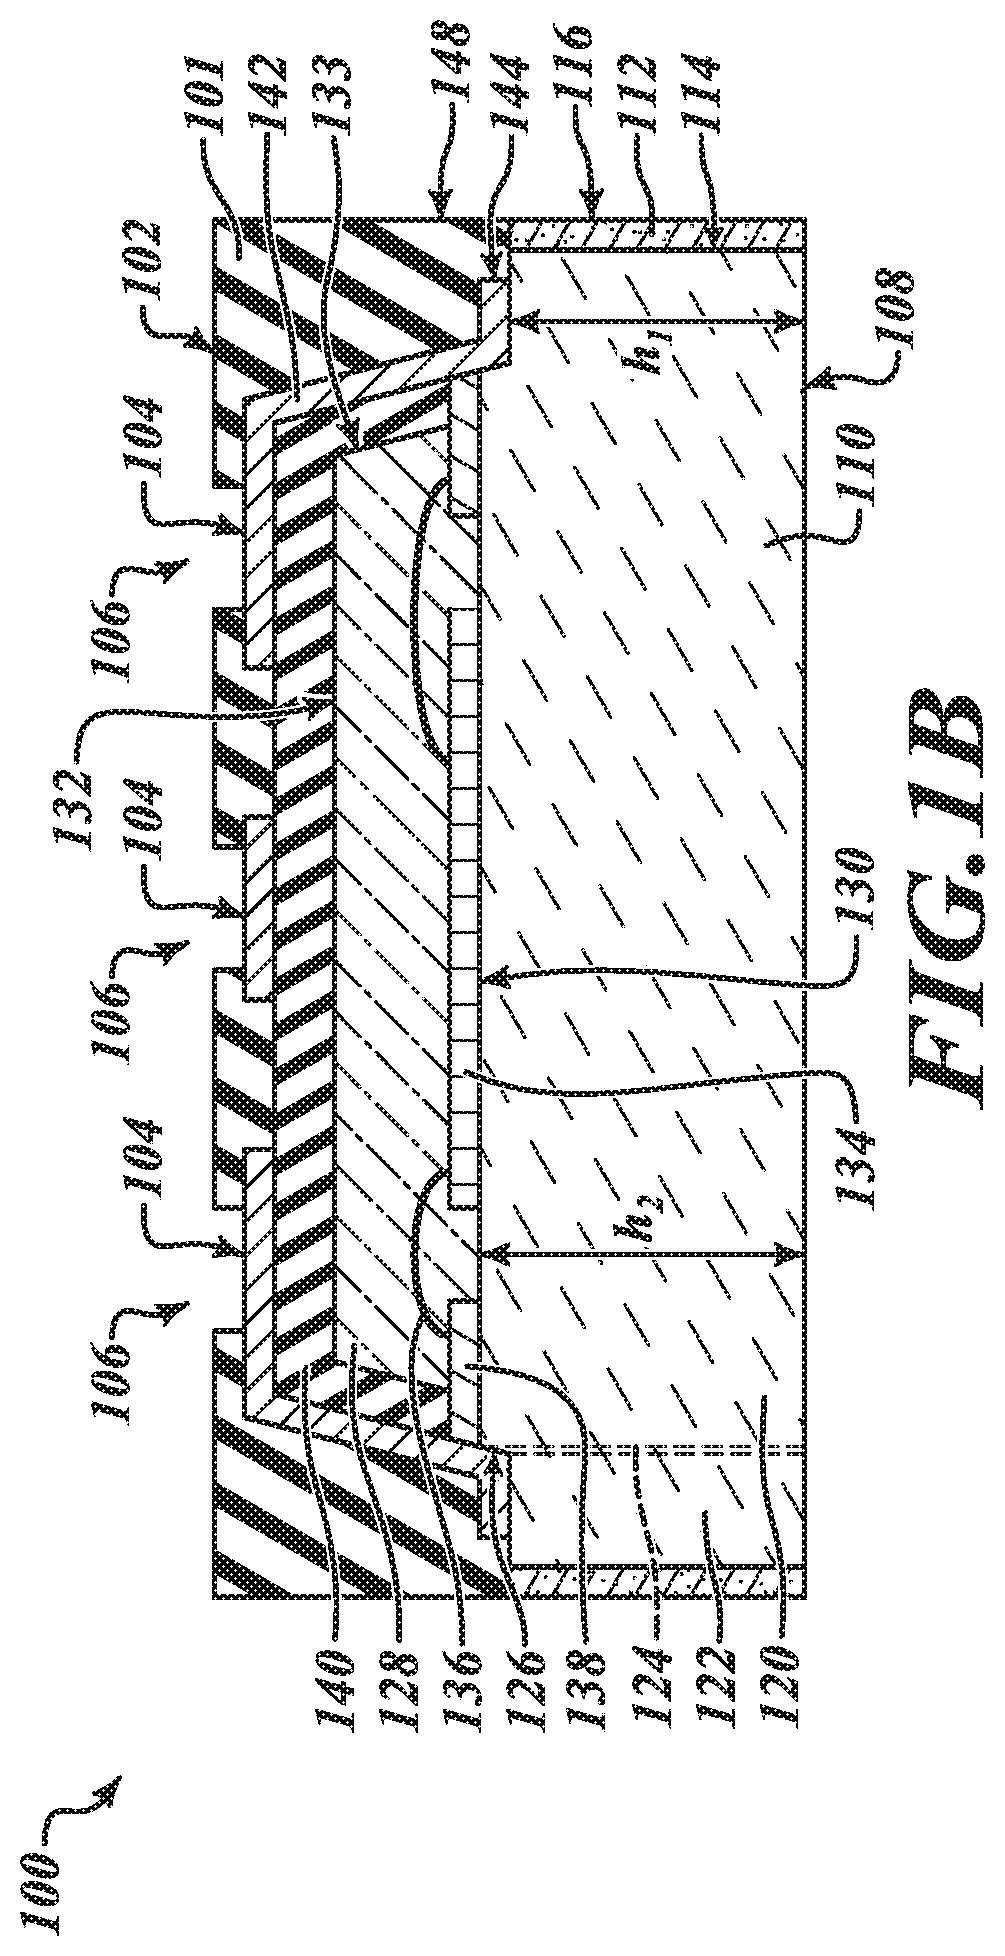 Wlcsp with transparent substrate and method of manufacturing the same